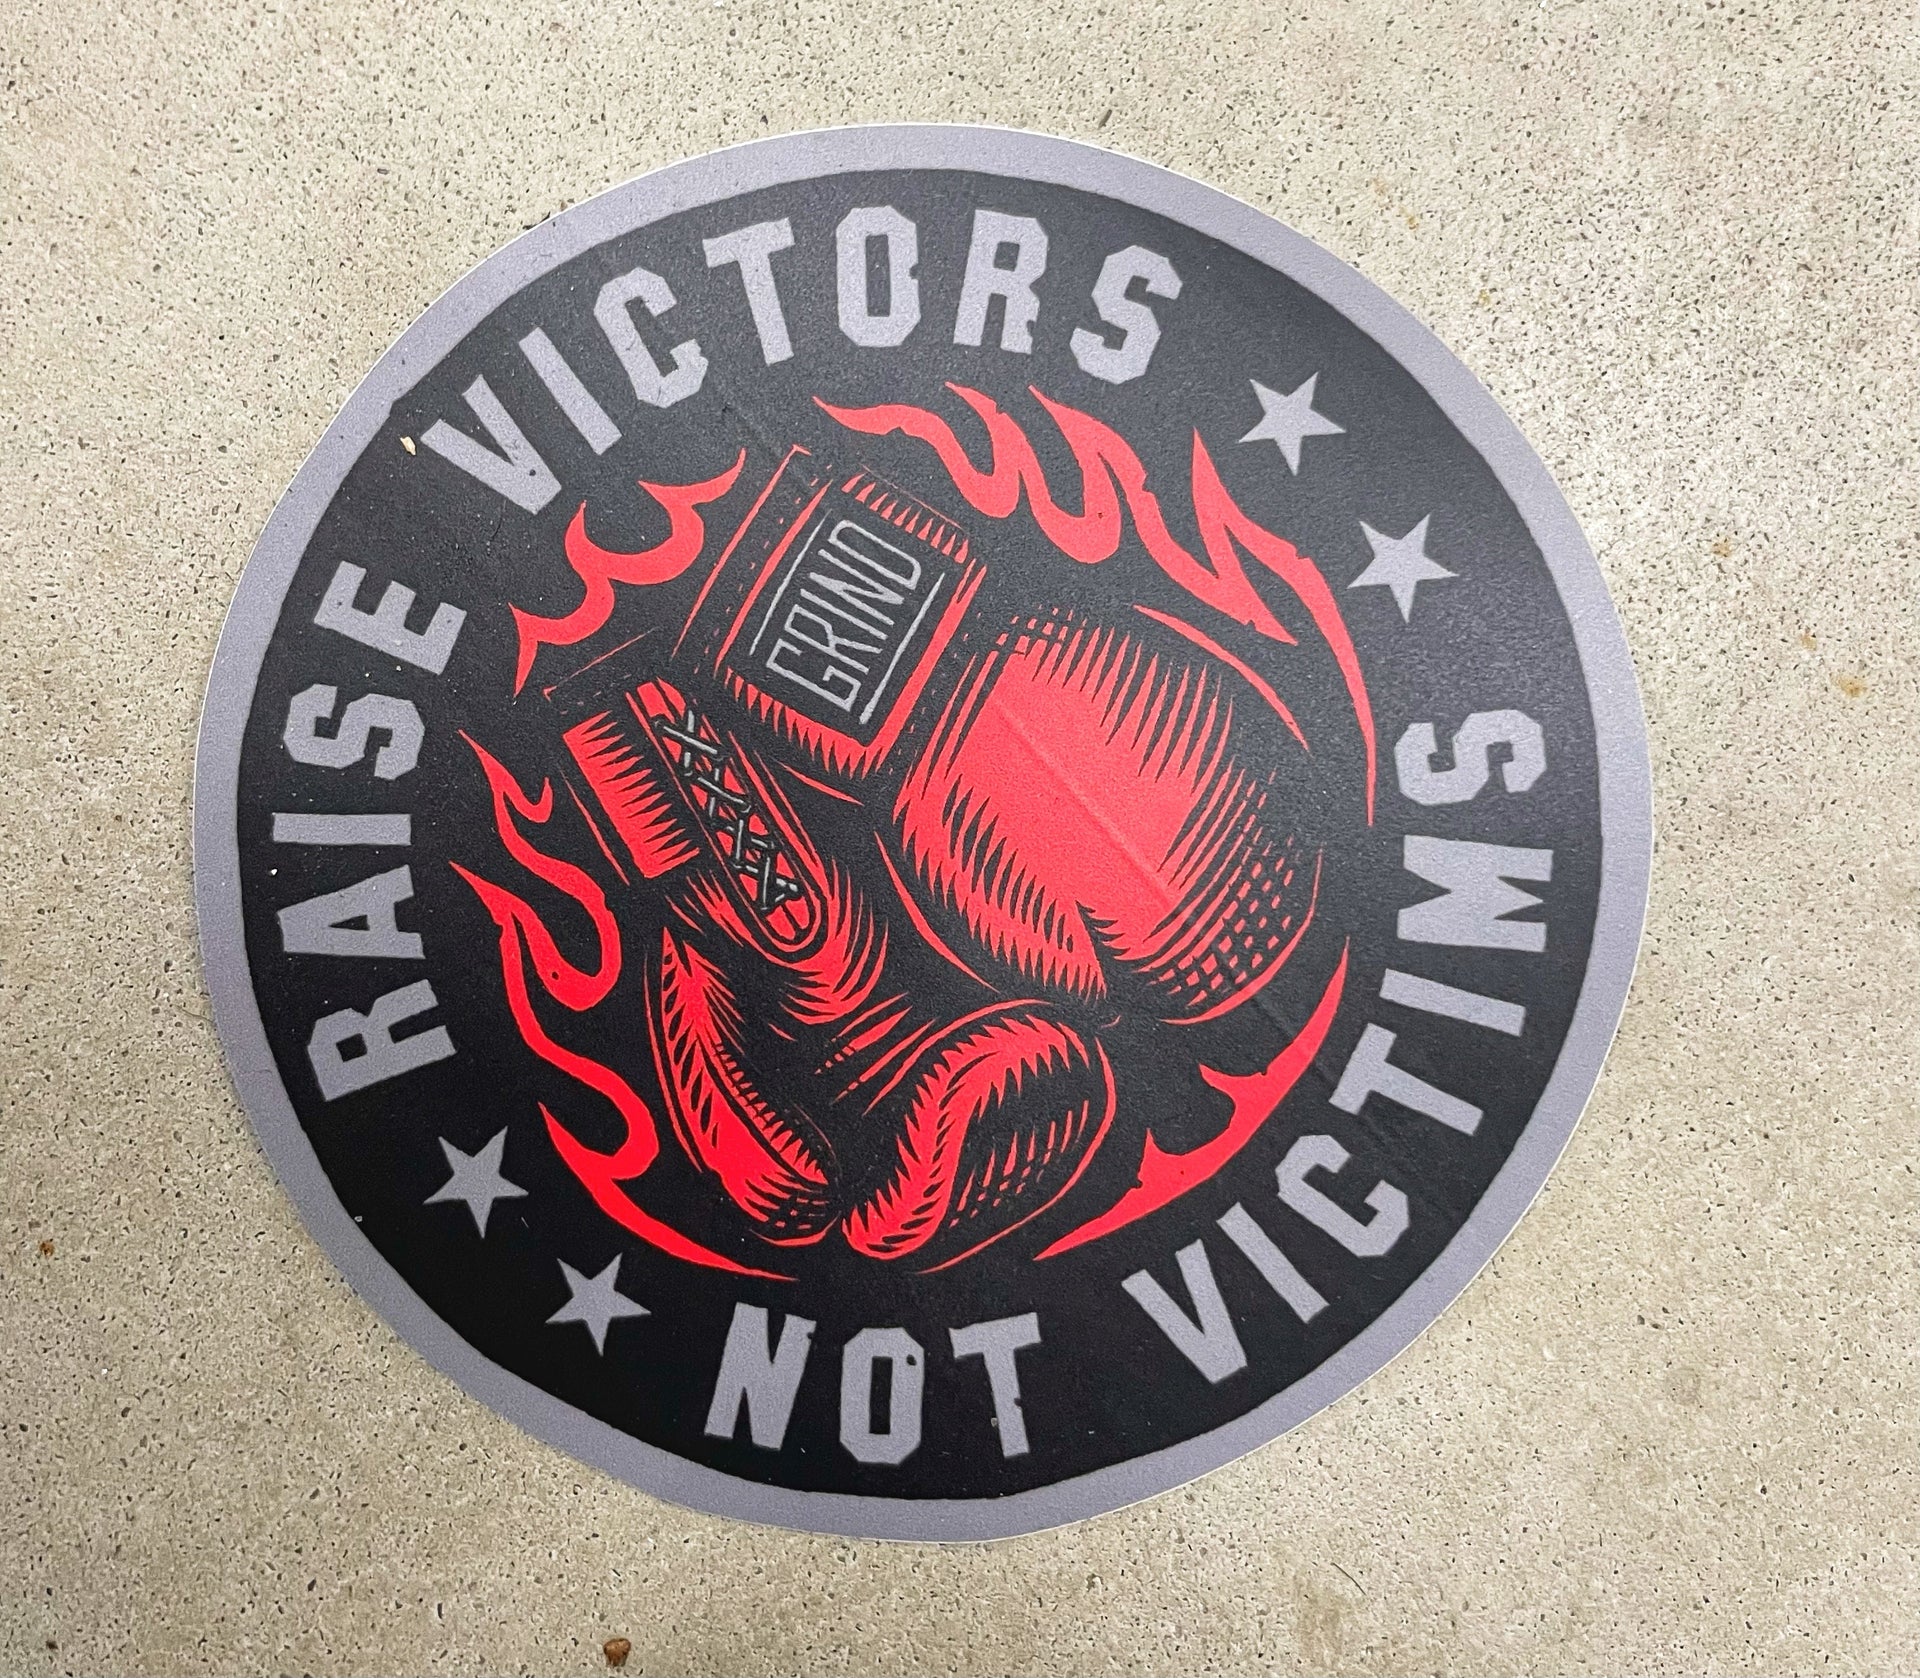 The Grind Athletics Raise Victors Not Victims - Stickers